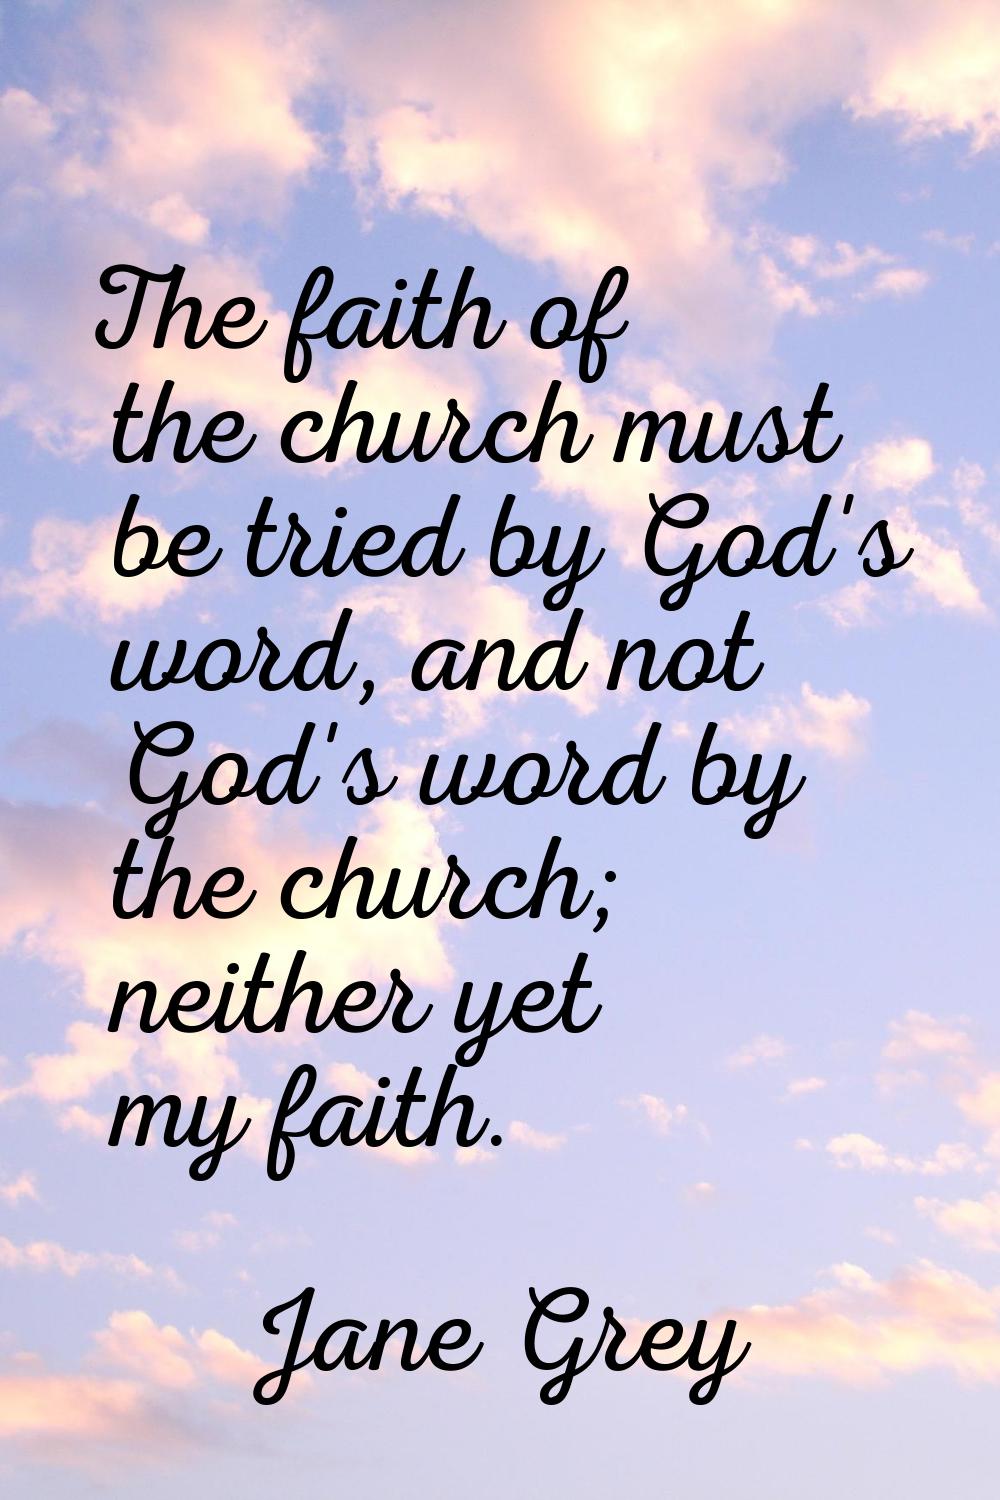 The faith of the church must be tried by God's word, and not God's word by the church; neither yet 